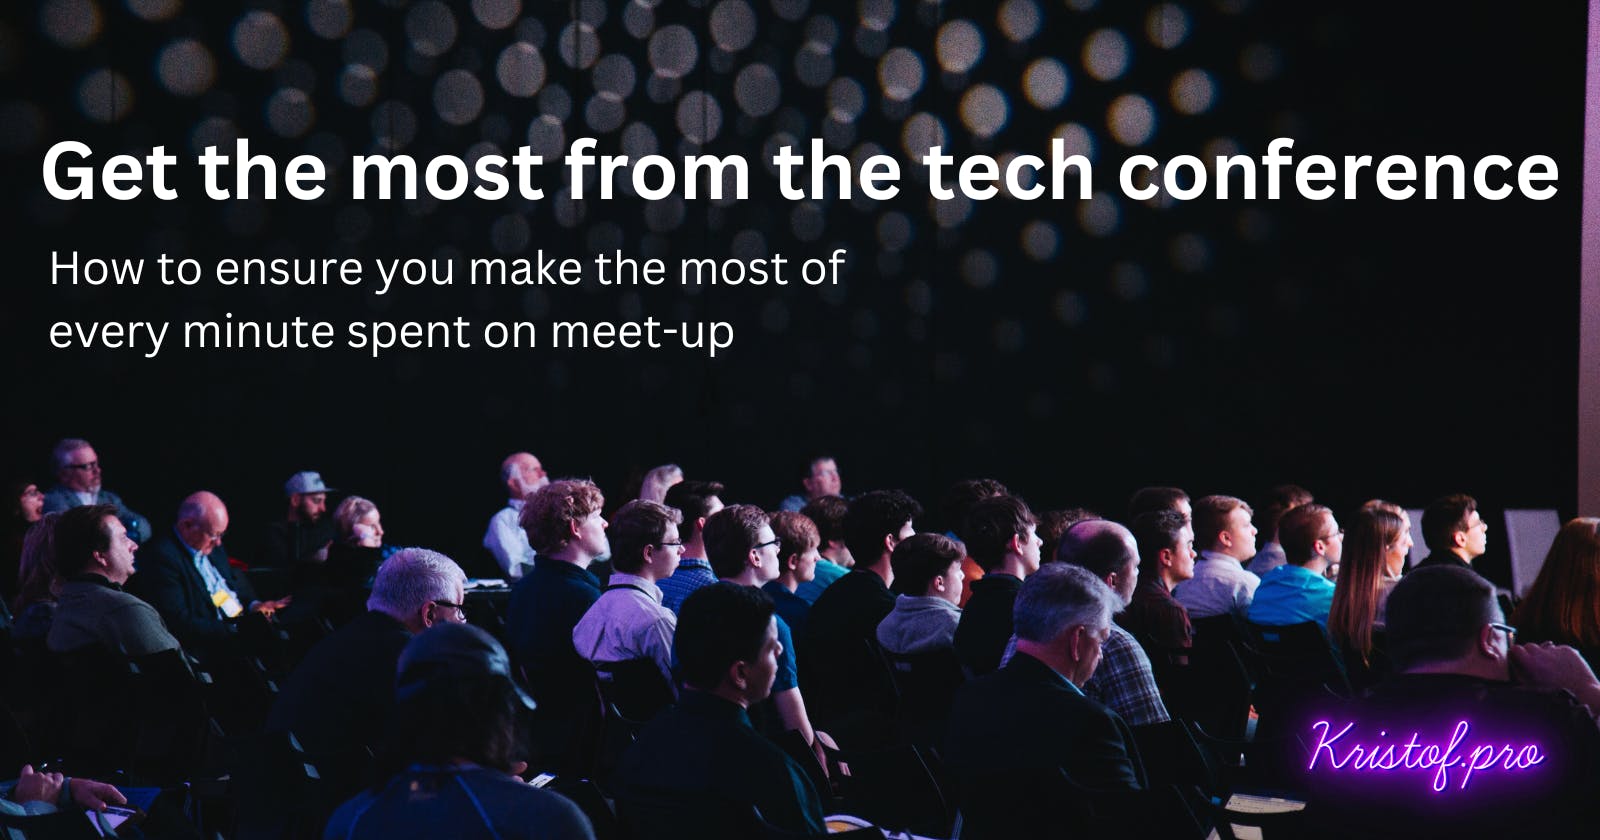 Get the most from the tech conference